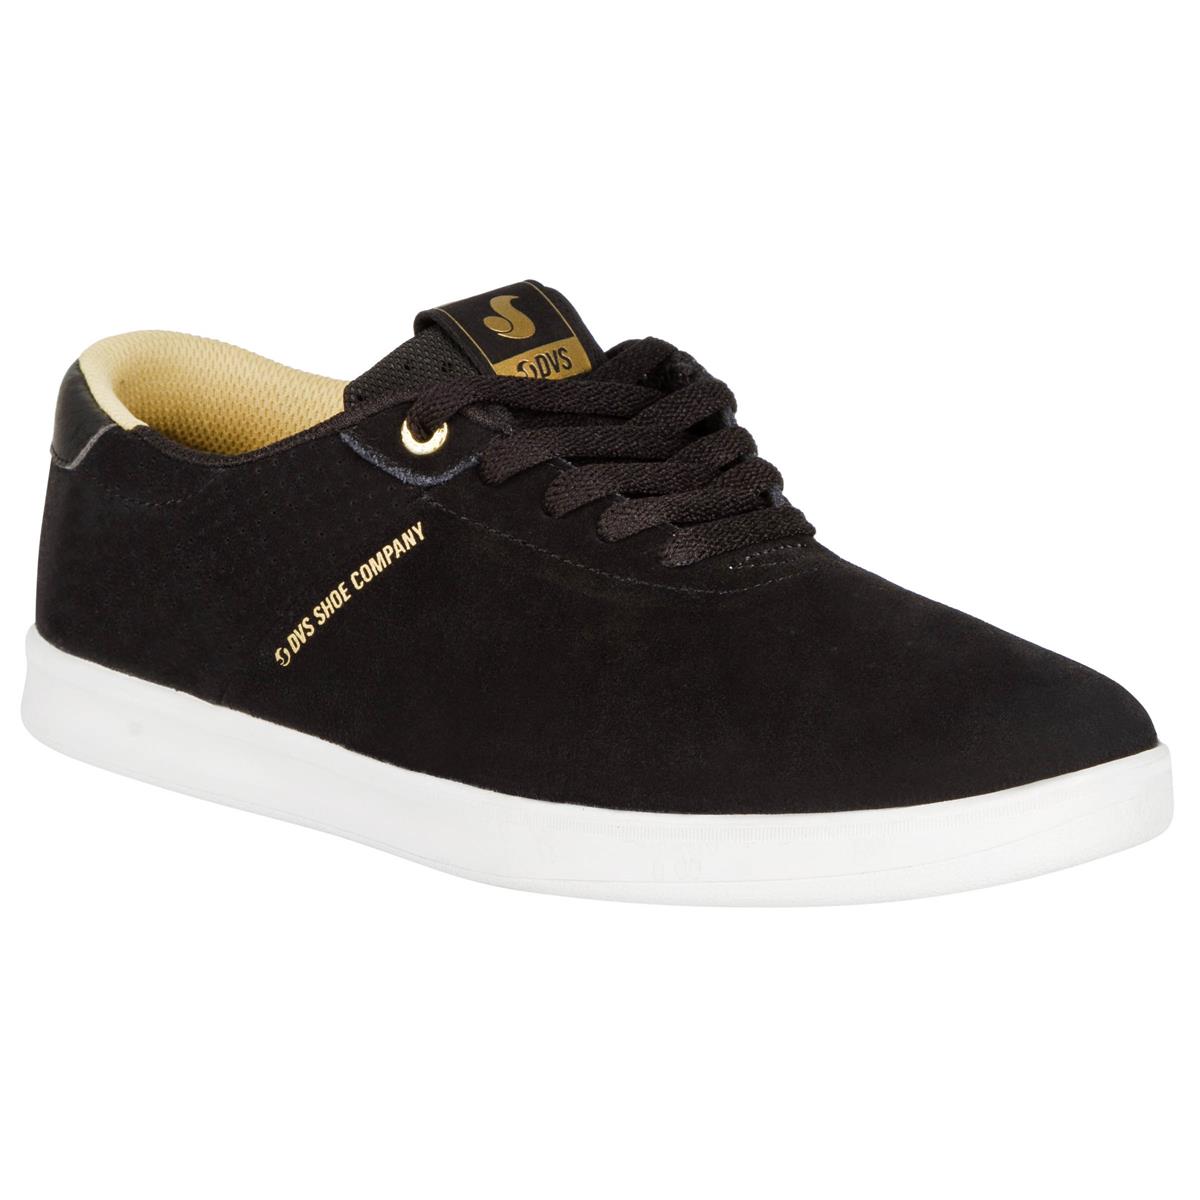 DVS Chaussures Rico SC Black/Gold Suede